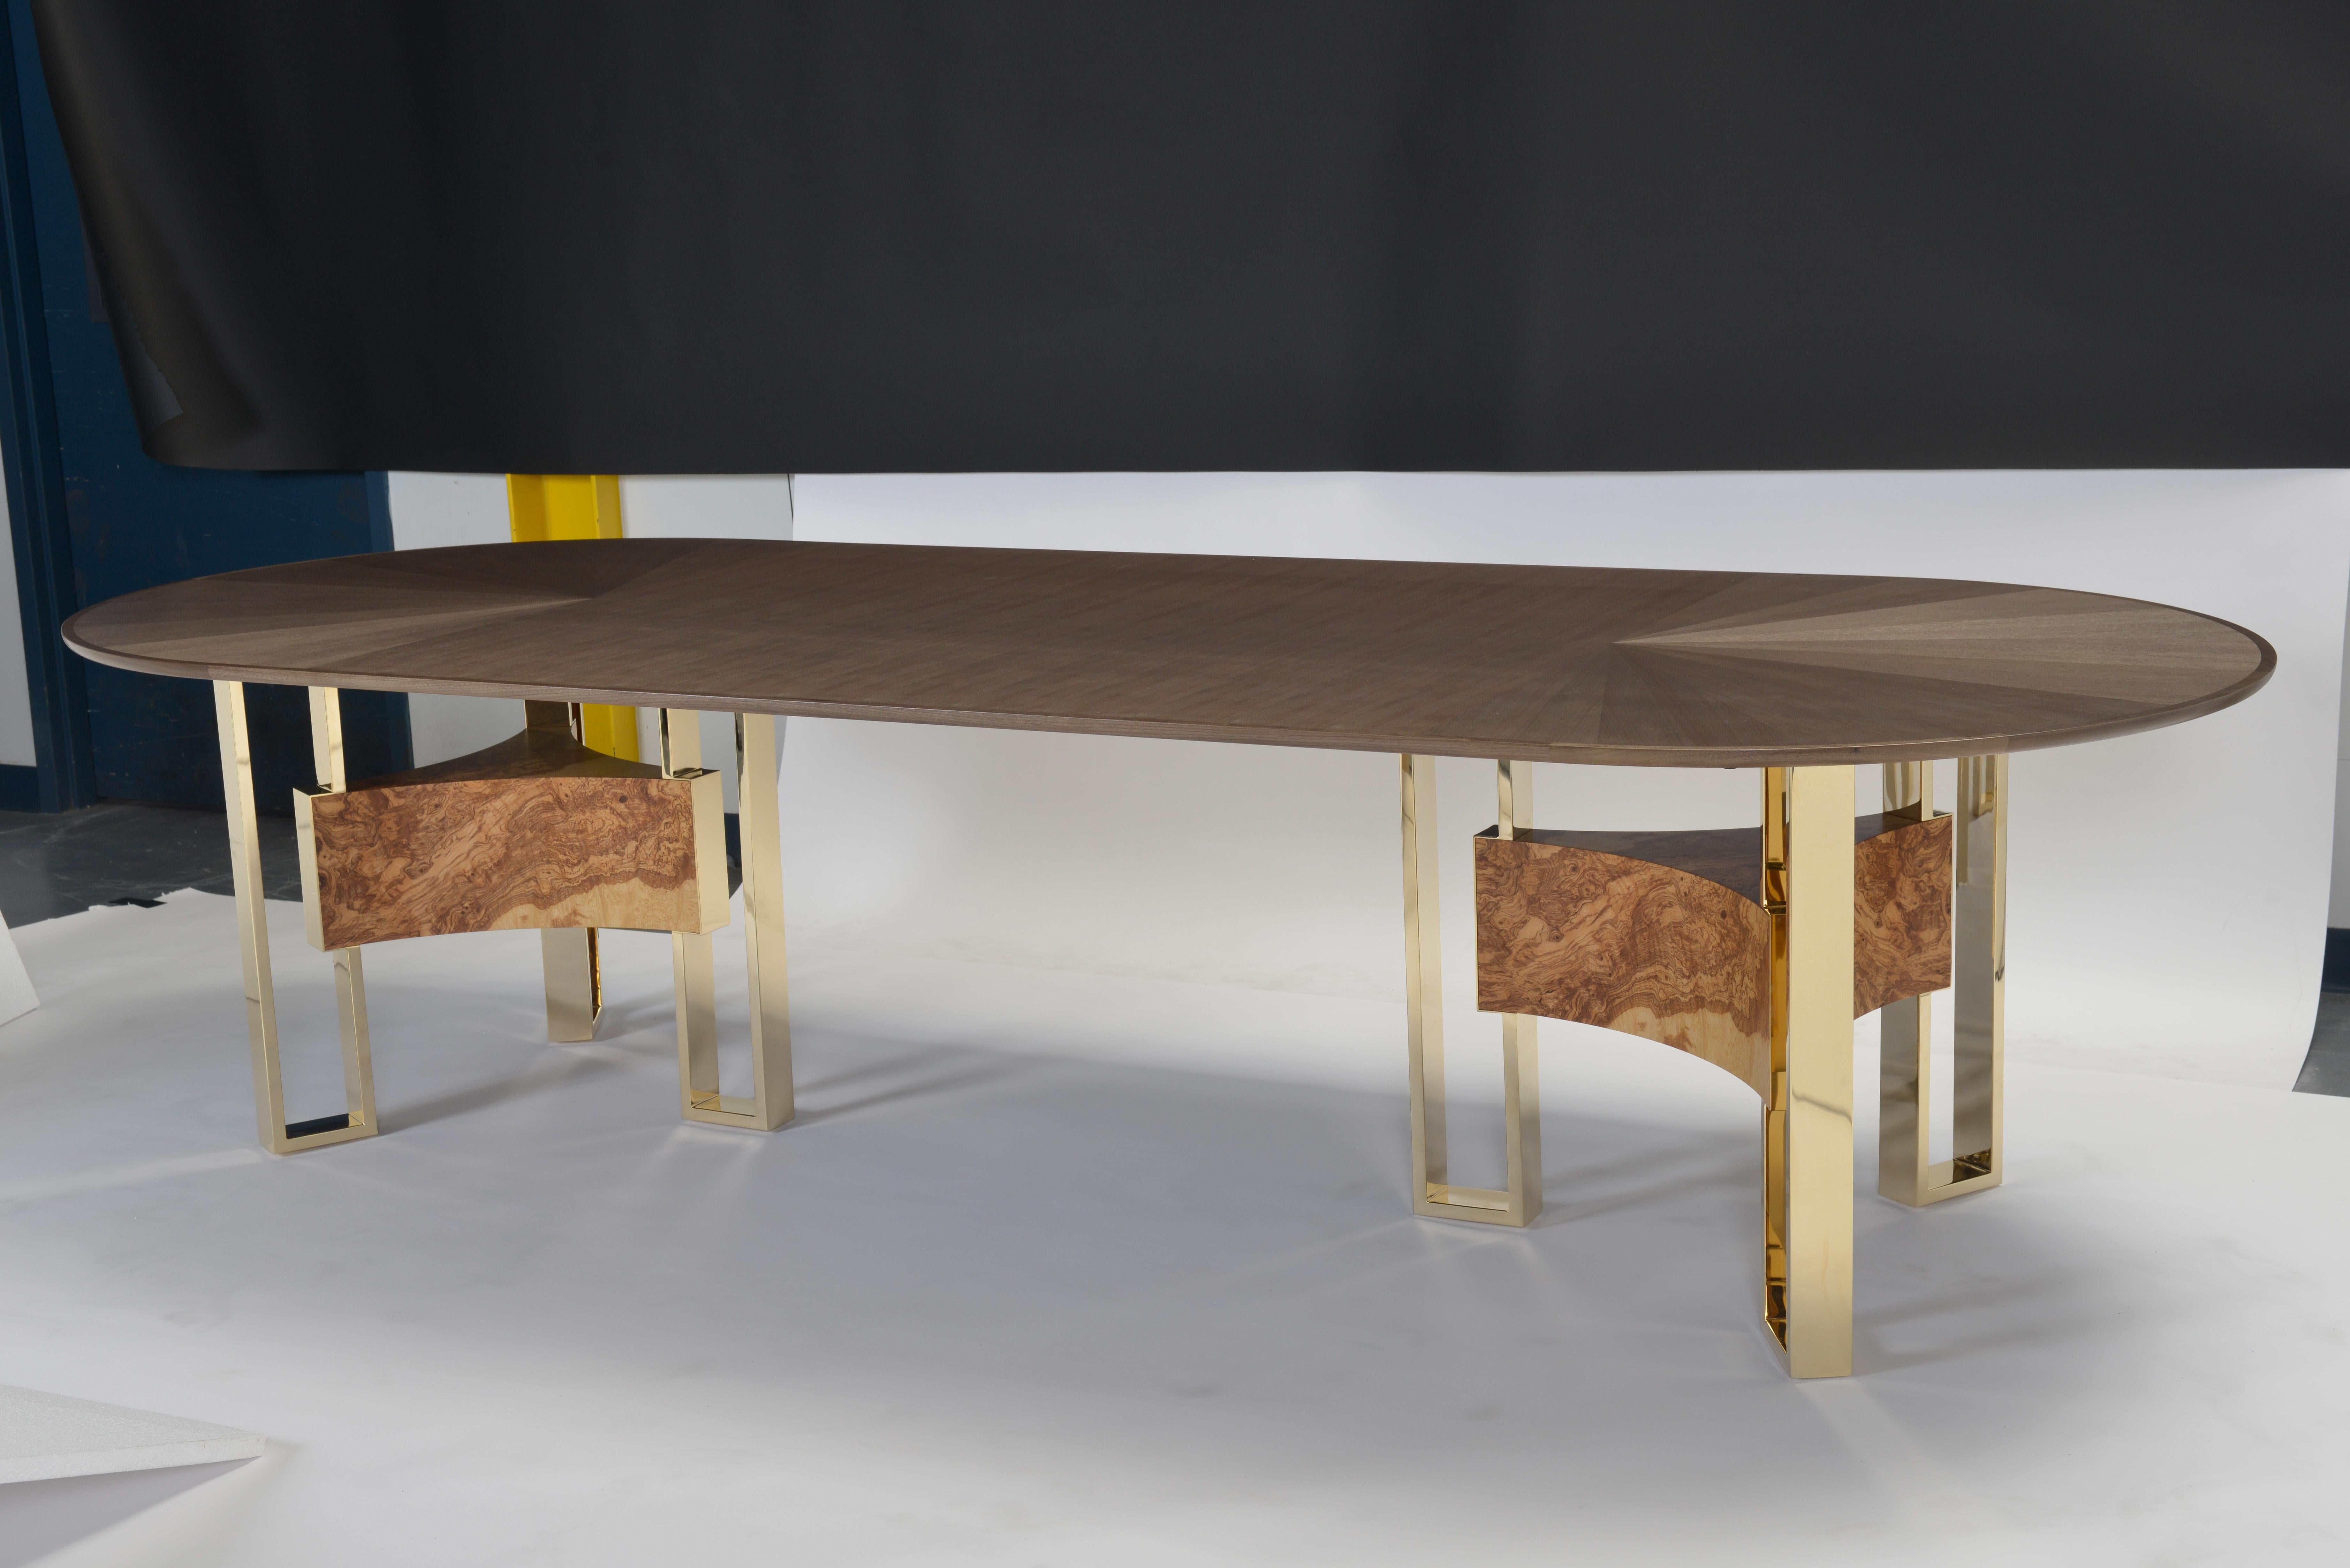 Obround dining table veneered in quartered walnut, bookmatched in a starburst pattern at each end with a slip matched centre field with quarter sawn walnut solid bands in an open grain finish in a medium sheen. Choose between polished gold-plated or